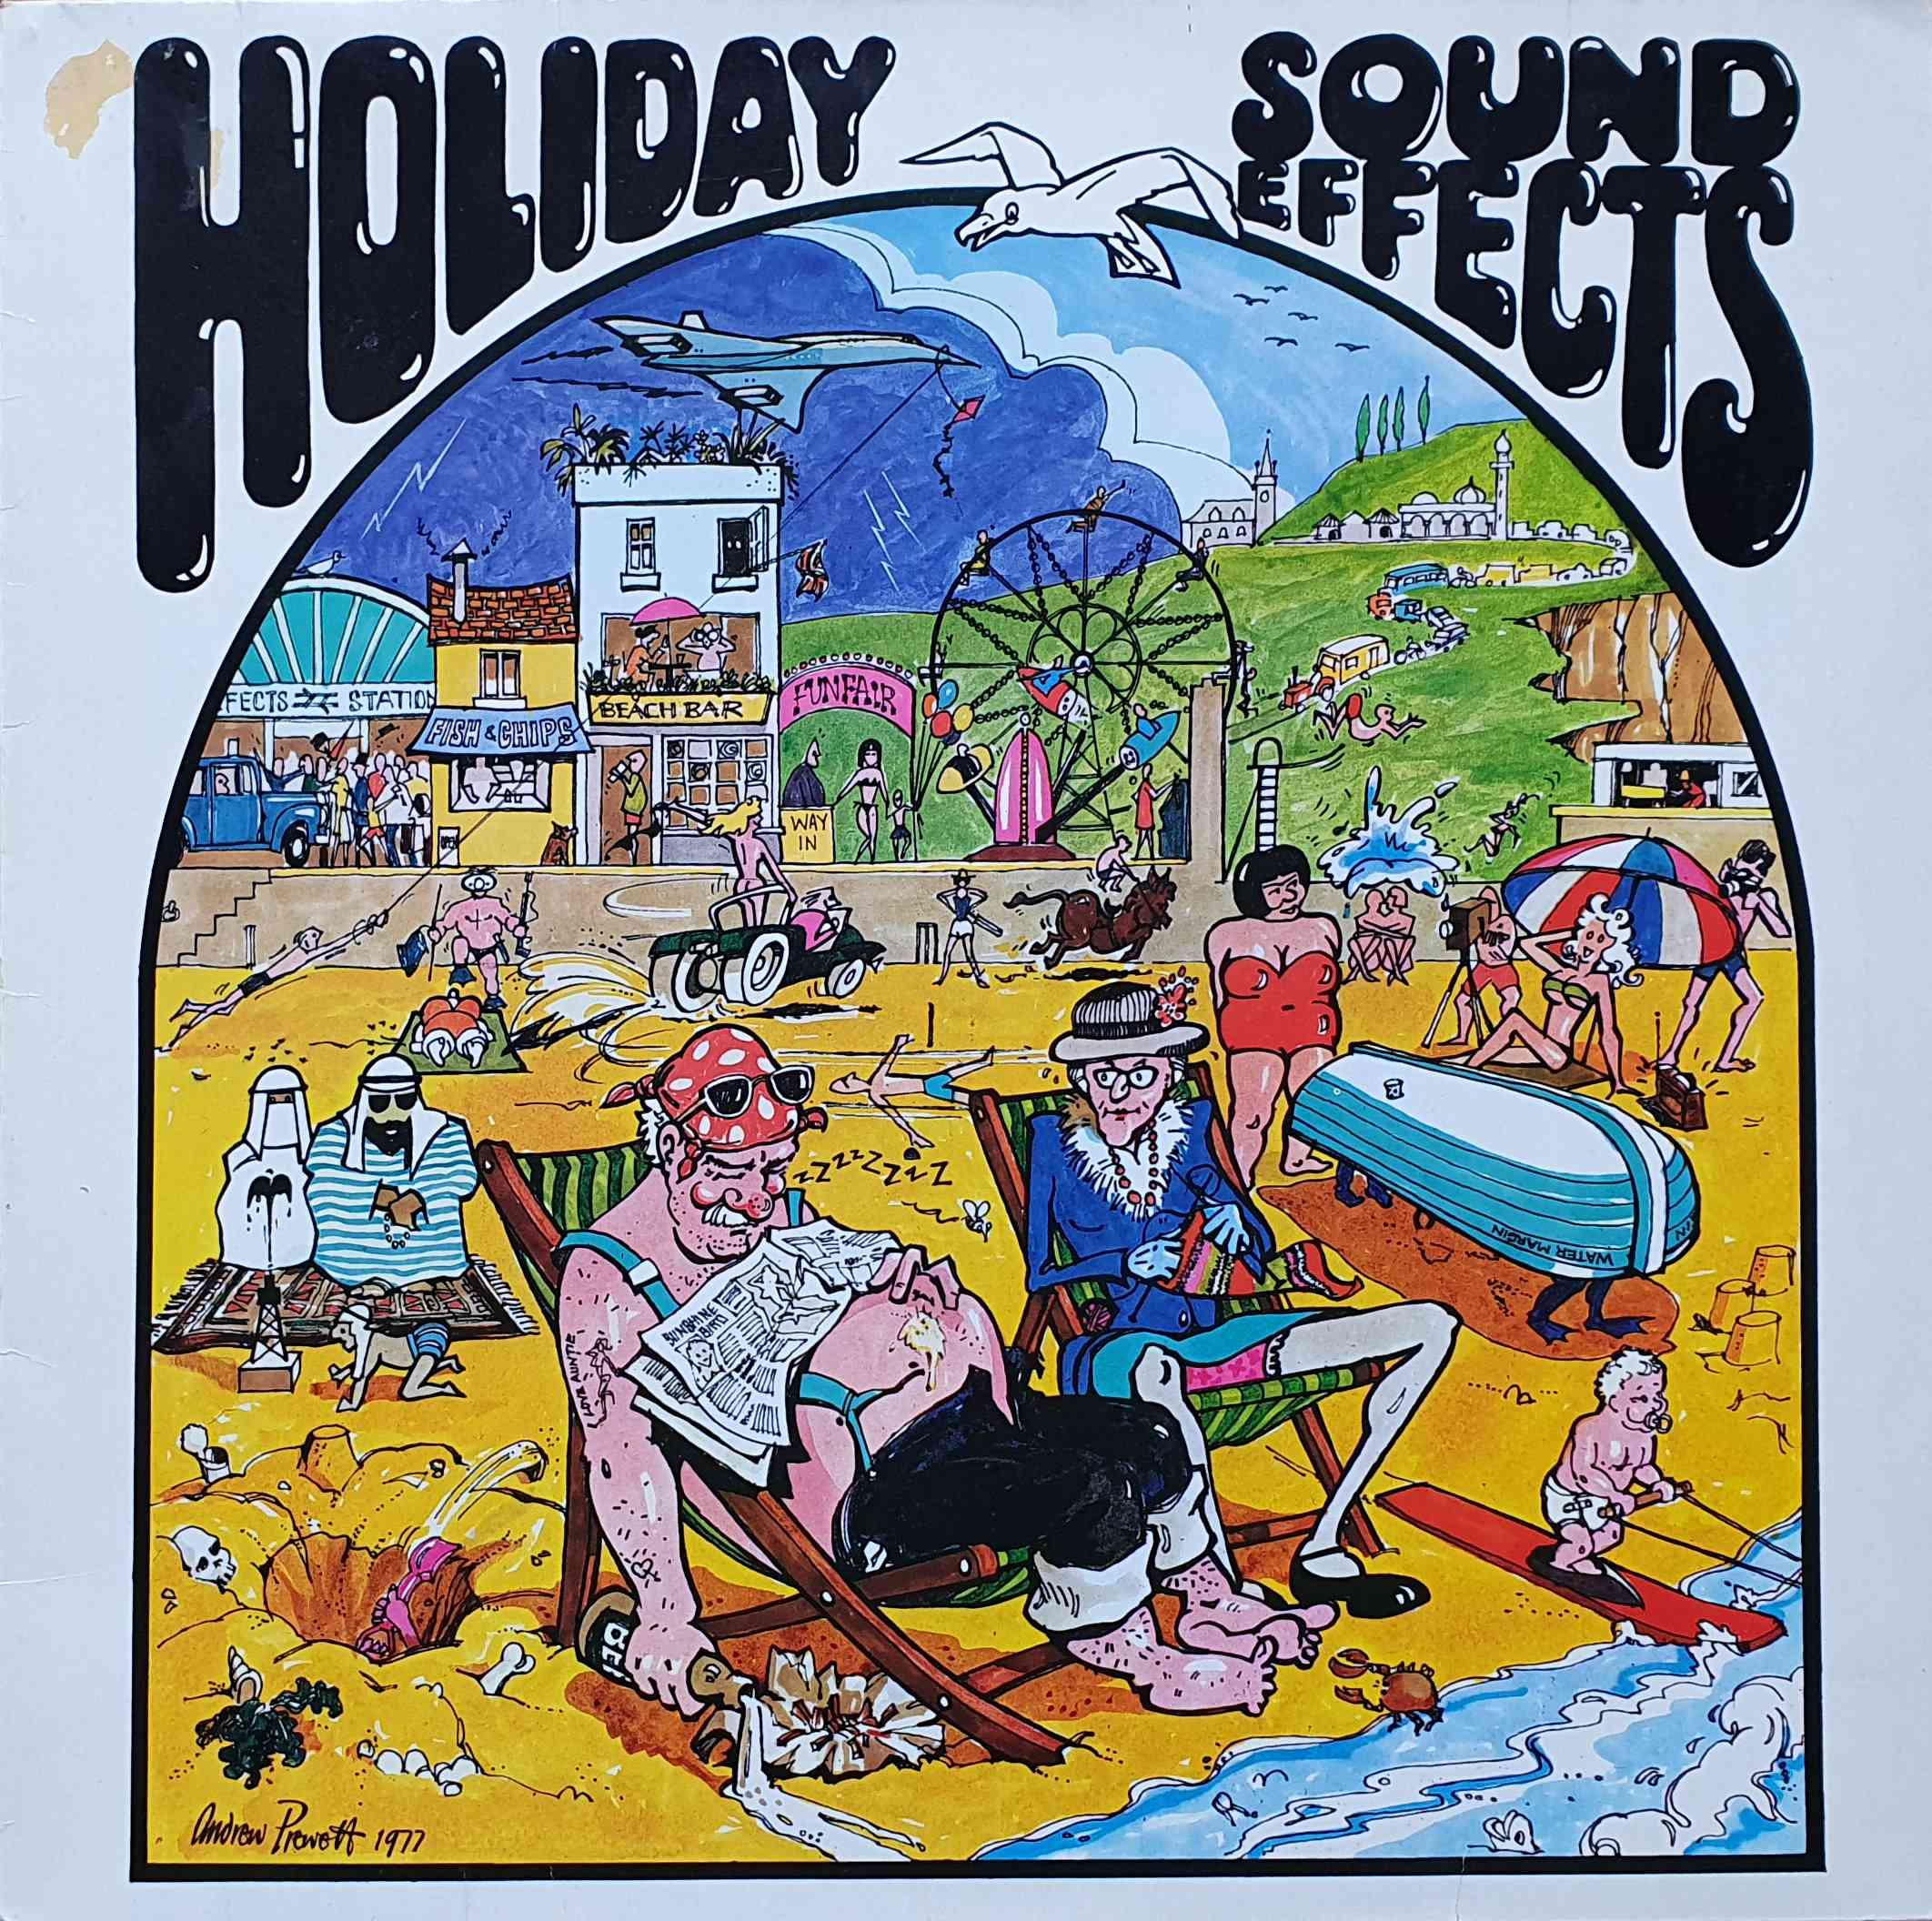 Picture of INT 128.004 Sound effects - Holiday sounds by artist Various from the BBC albums - Records and Tapes library